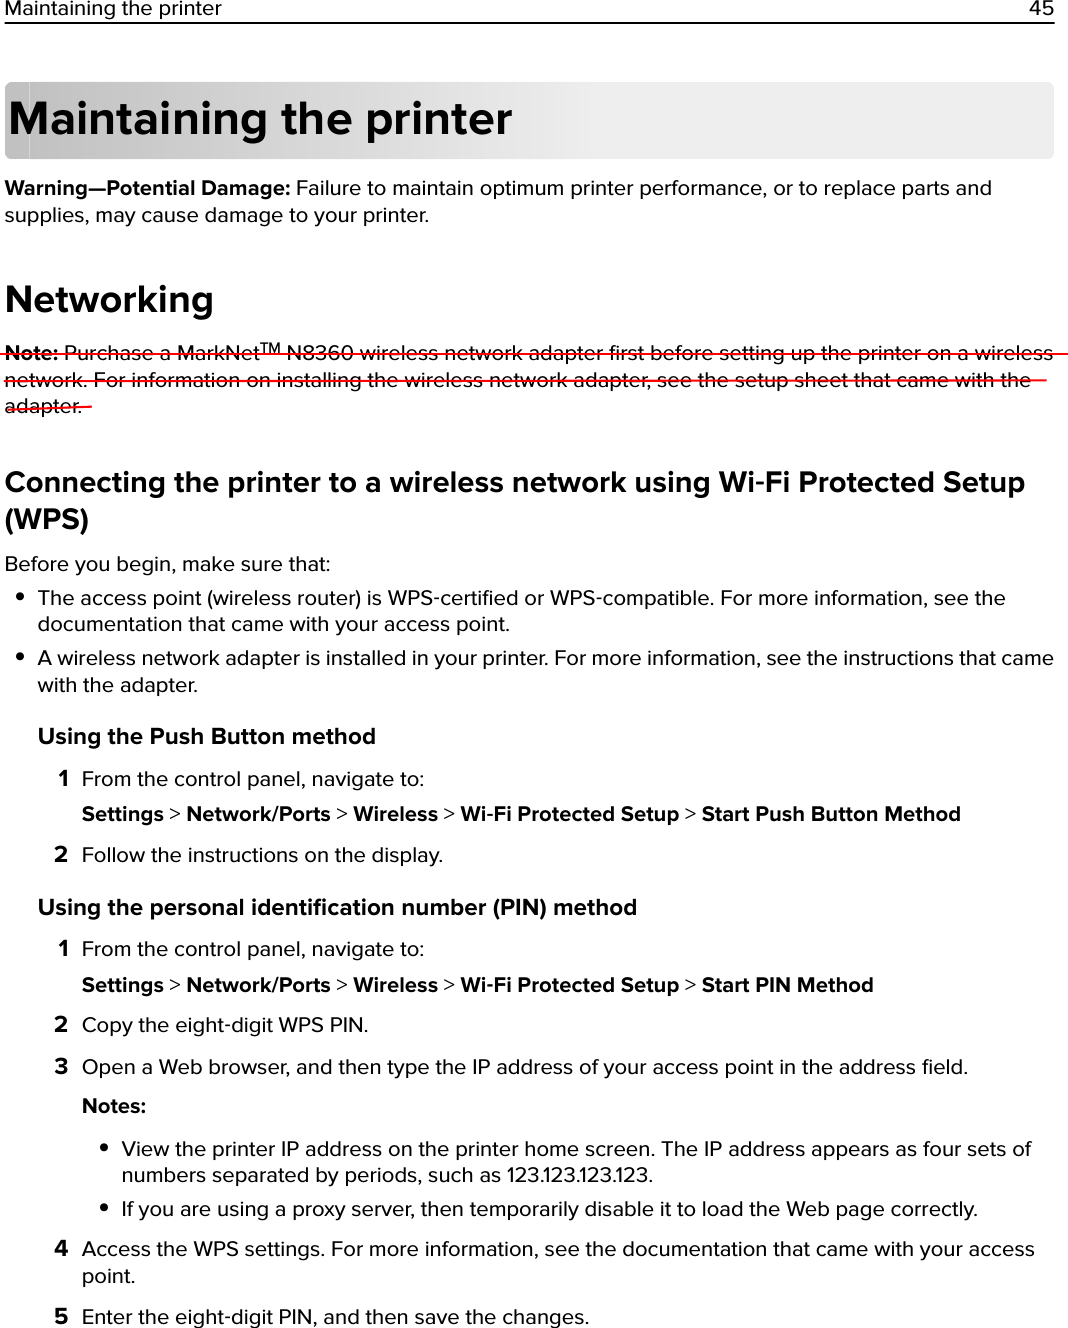 Maintaining the printerWarning—Potential Damage: Failure to maintain optimum printer performance, or to replace parts andsupplies, may cause damage to your printer.NetworkingNote: Purchase a MarkNetTM N8360 wireless network adapter ﬁrst before setting up the printer on a wirelessnetwork. For information on installing the wireless network adapter, see the setup sheet that came with theadapter.Connecting the printer to a wireless network using Wi‑Fi Protected Setup(WPS)Before you begin, make sure that:•The access point (wireless router) is WPS‑certiﬁed or WPS‑compatible. For more information, see thedocumentation that came with your access point.•A wireless network adapter is installed in your printer. For more information, see the instructions that camewith the adapter.Using the Push Button method1From the control panel, navigate to:Settings &gt; Network/Ports &gt; Wireless &gt; Wi‑Fi Protected Setup &gt; Start Push Button Method2Follow the instructions on the display.Using the personal identiﬁcation number (PIN) method1From the control panel, navigate to:Settings &gt; Network/Ports &gt; Wireless &gt; Wi‑Fi Protected Setup &gt; Start PIN Method2Copy the eight‑digit WPS PIN.3Open a Web browser, and then type the IP address of your access point in the address ﬁeld.Notes:•View the printer IP address on the printer home screen. The IP address appears as four sets ofnumbers separated by periods, such as 123.123.123.123.•If you are using a proxy server, then temporarily disable it to load the Web page correctly.4Access the WPS settings. For more information, see the documentation that came with your accesspoint.5Enter the eight‑digit PIN, and then save the changes.Maintaining the printer 45